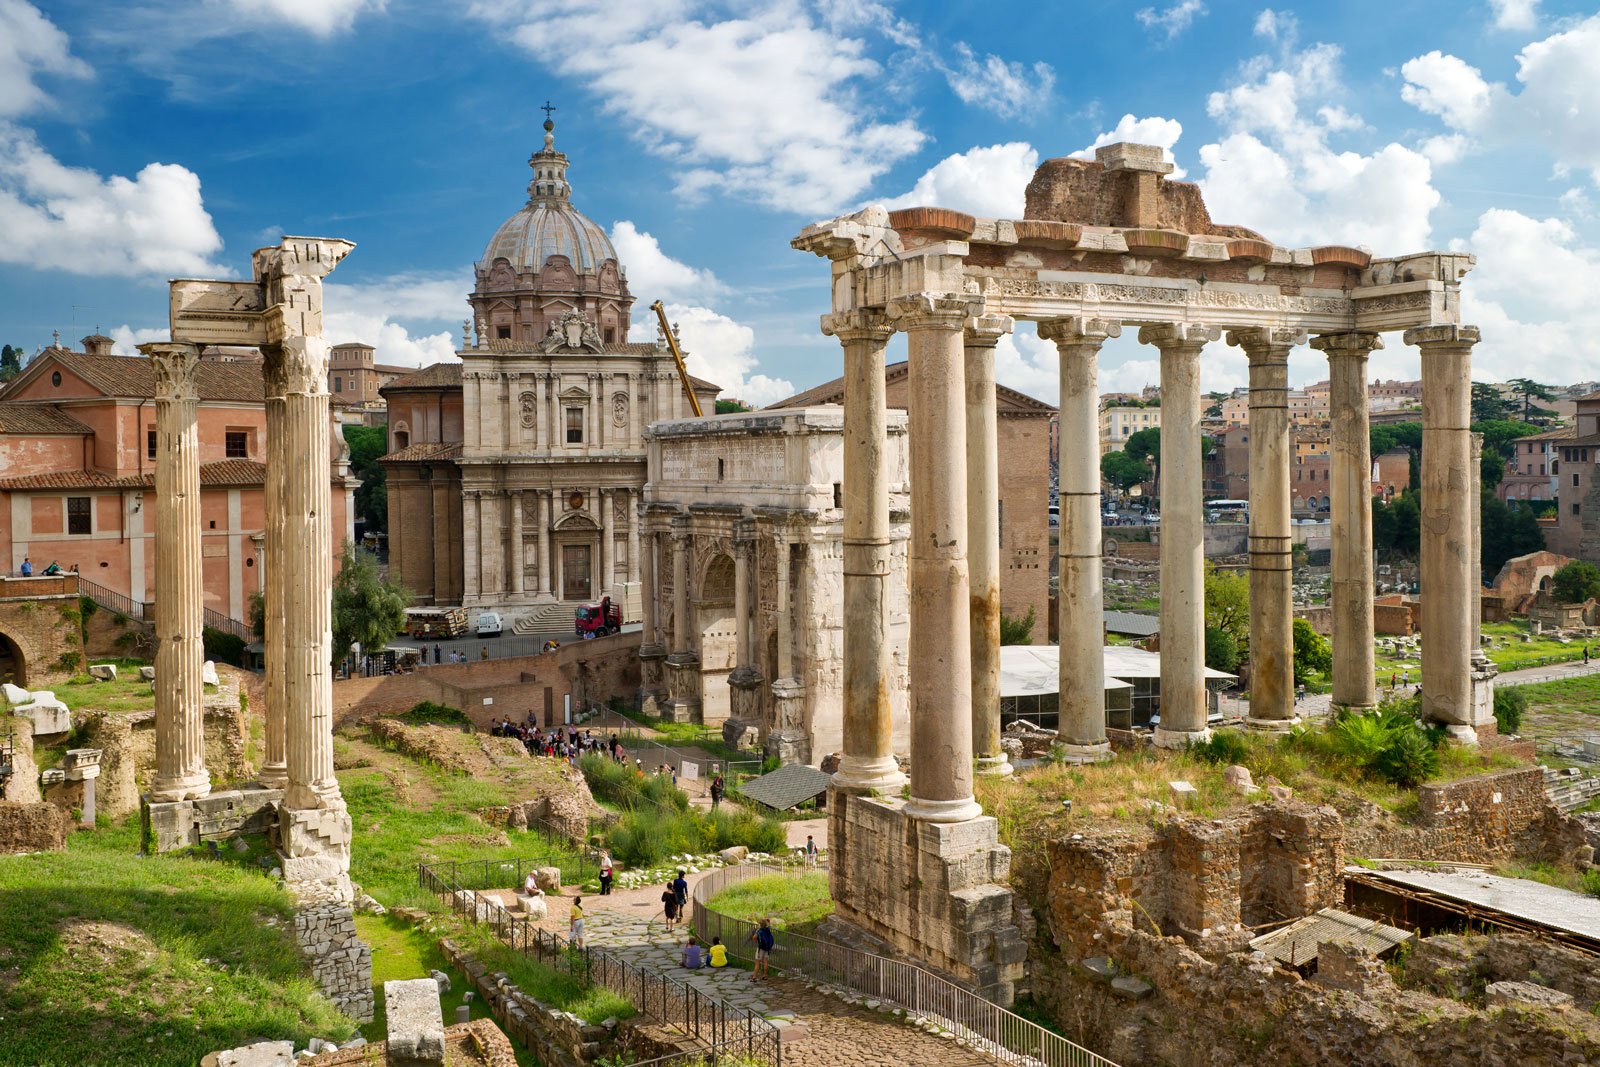 View over the Roman Forum from the Capitoline Hill